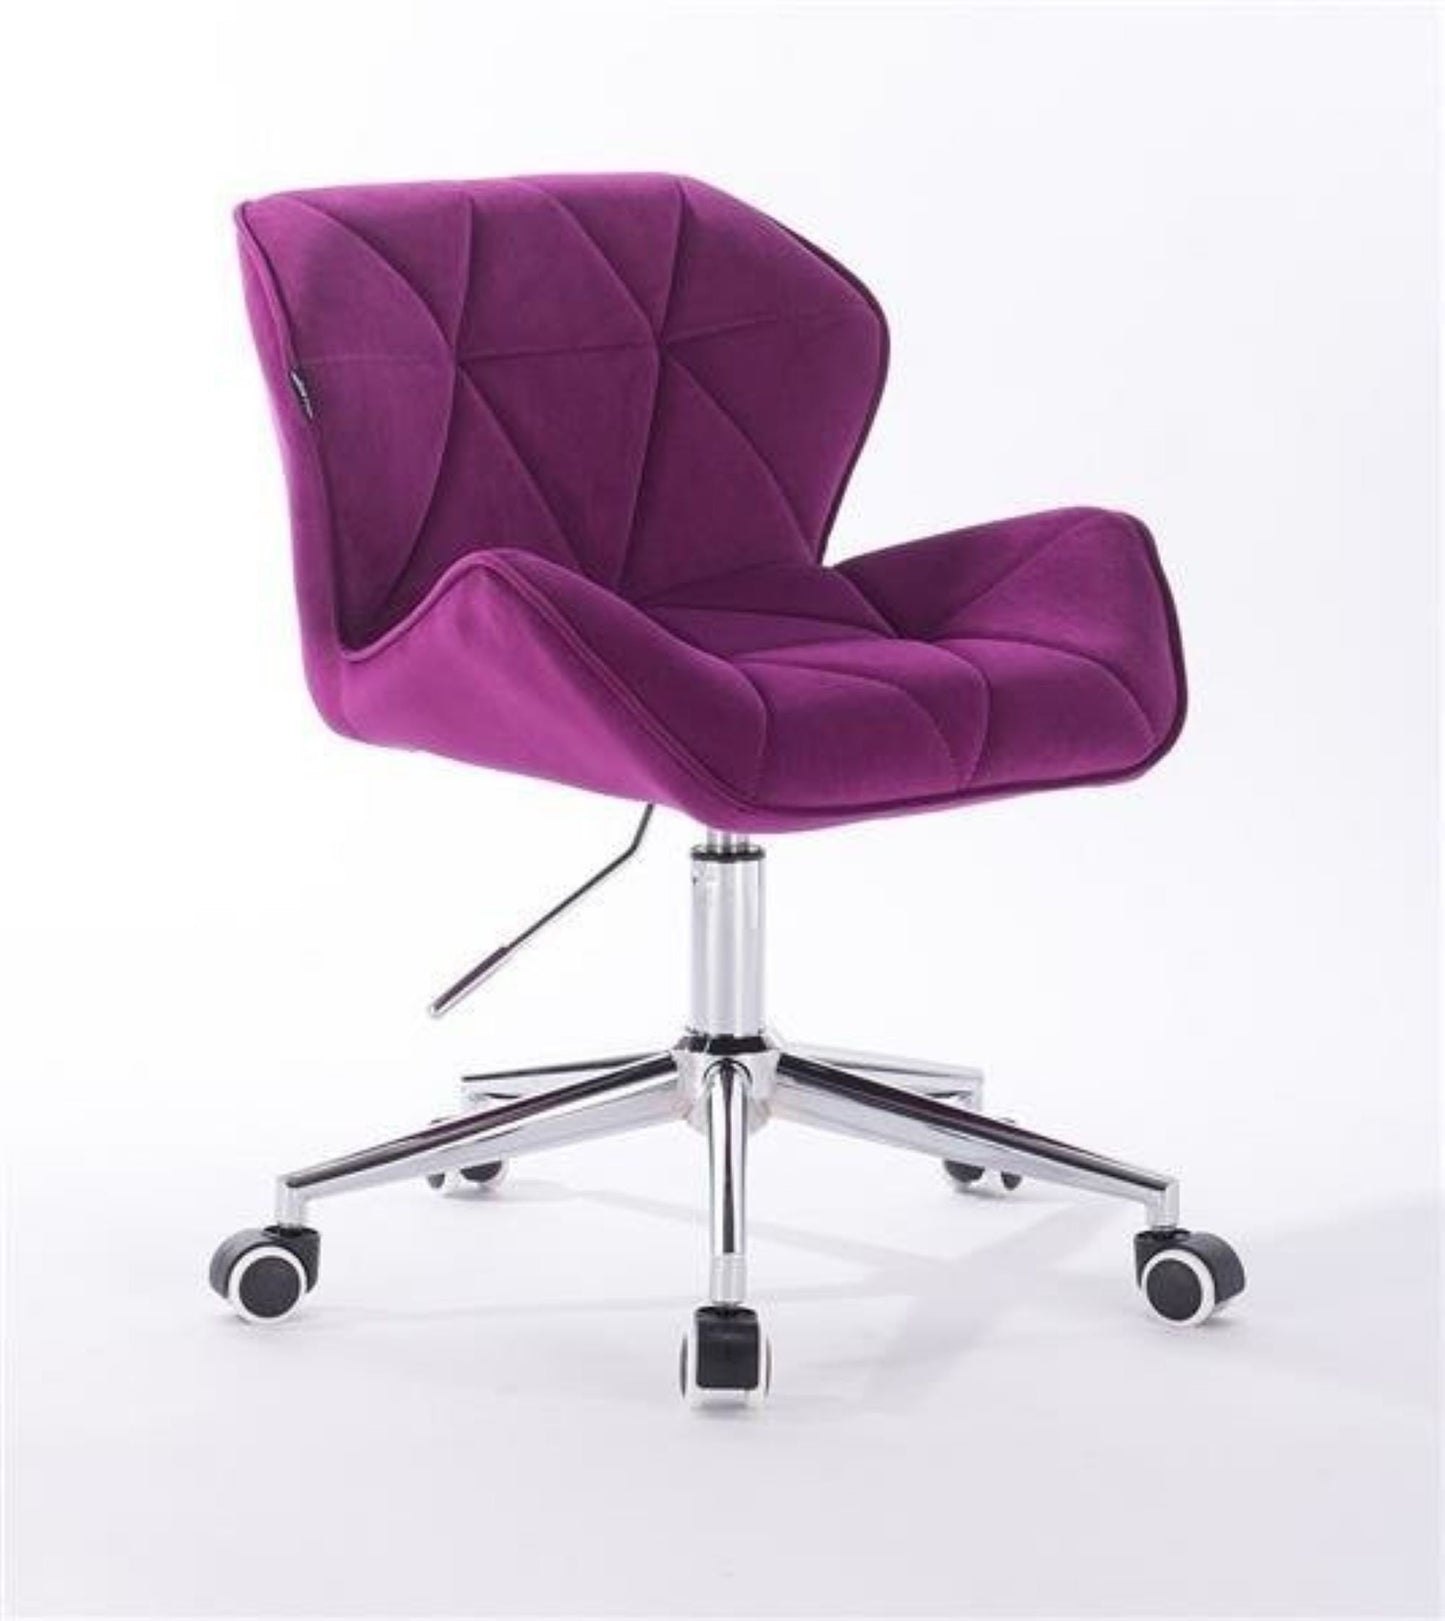 Beautiful & stylish Velour Designer adjustable swivel office/desk chair with gold base - Many colours available